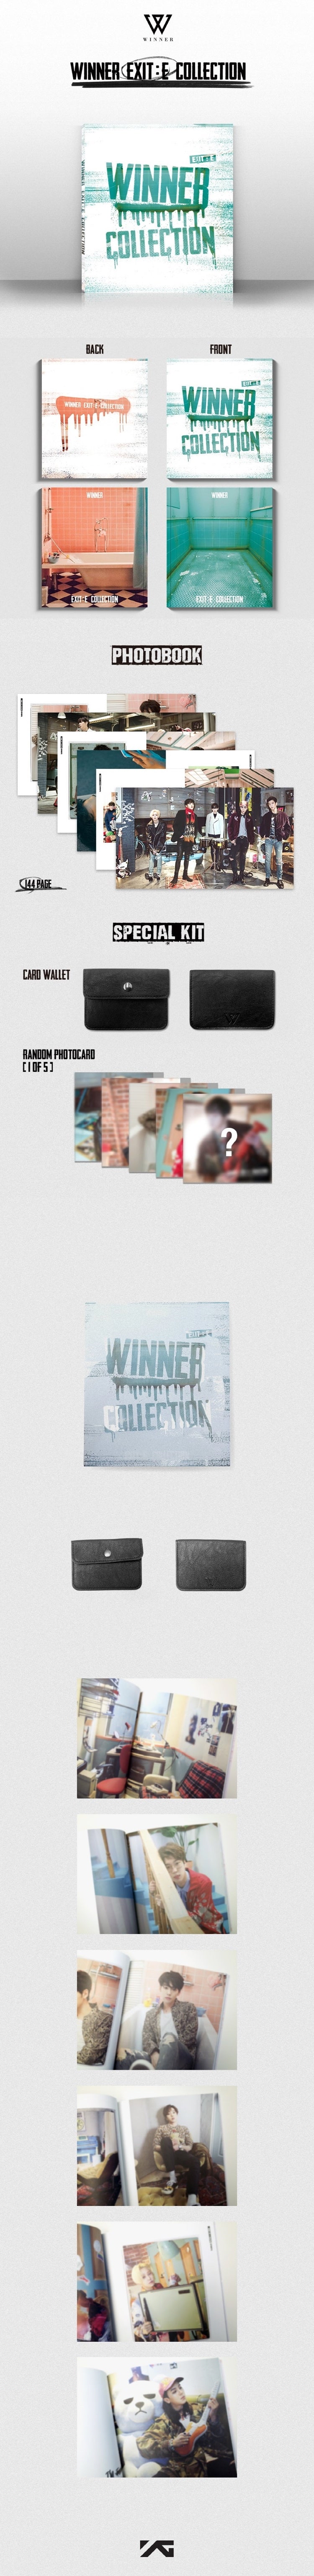 WINNER EXIT : E COLLECTION PHOTO BOOK(144p)+1p Card Wallet+1p Photo Card K-POP Sealed